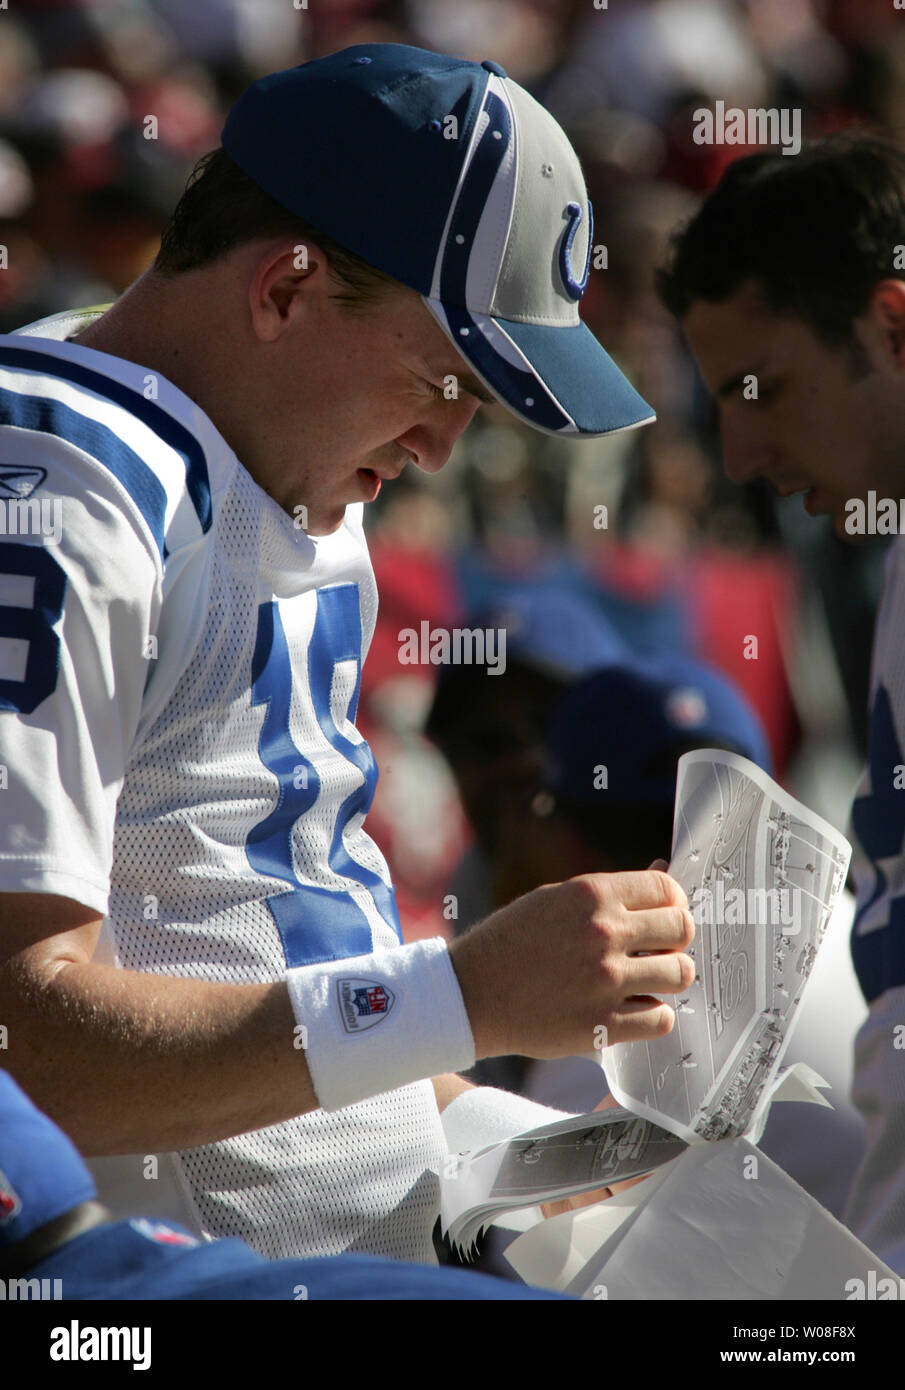 Indianapolis Colts QB Peyton Manning reviews 49er formations as he waits for the defense to get the ball during play against the San Francisco 49ers at Monster Park in San Francisco on October 9, 2005.  (UPI Photo/Terry Schmitt) Stock Photo